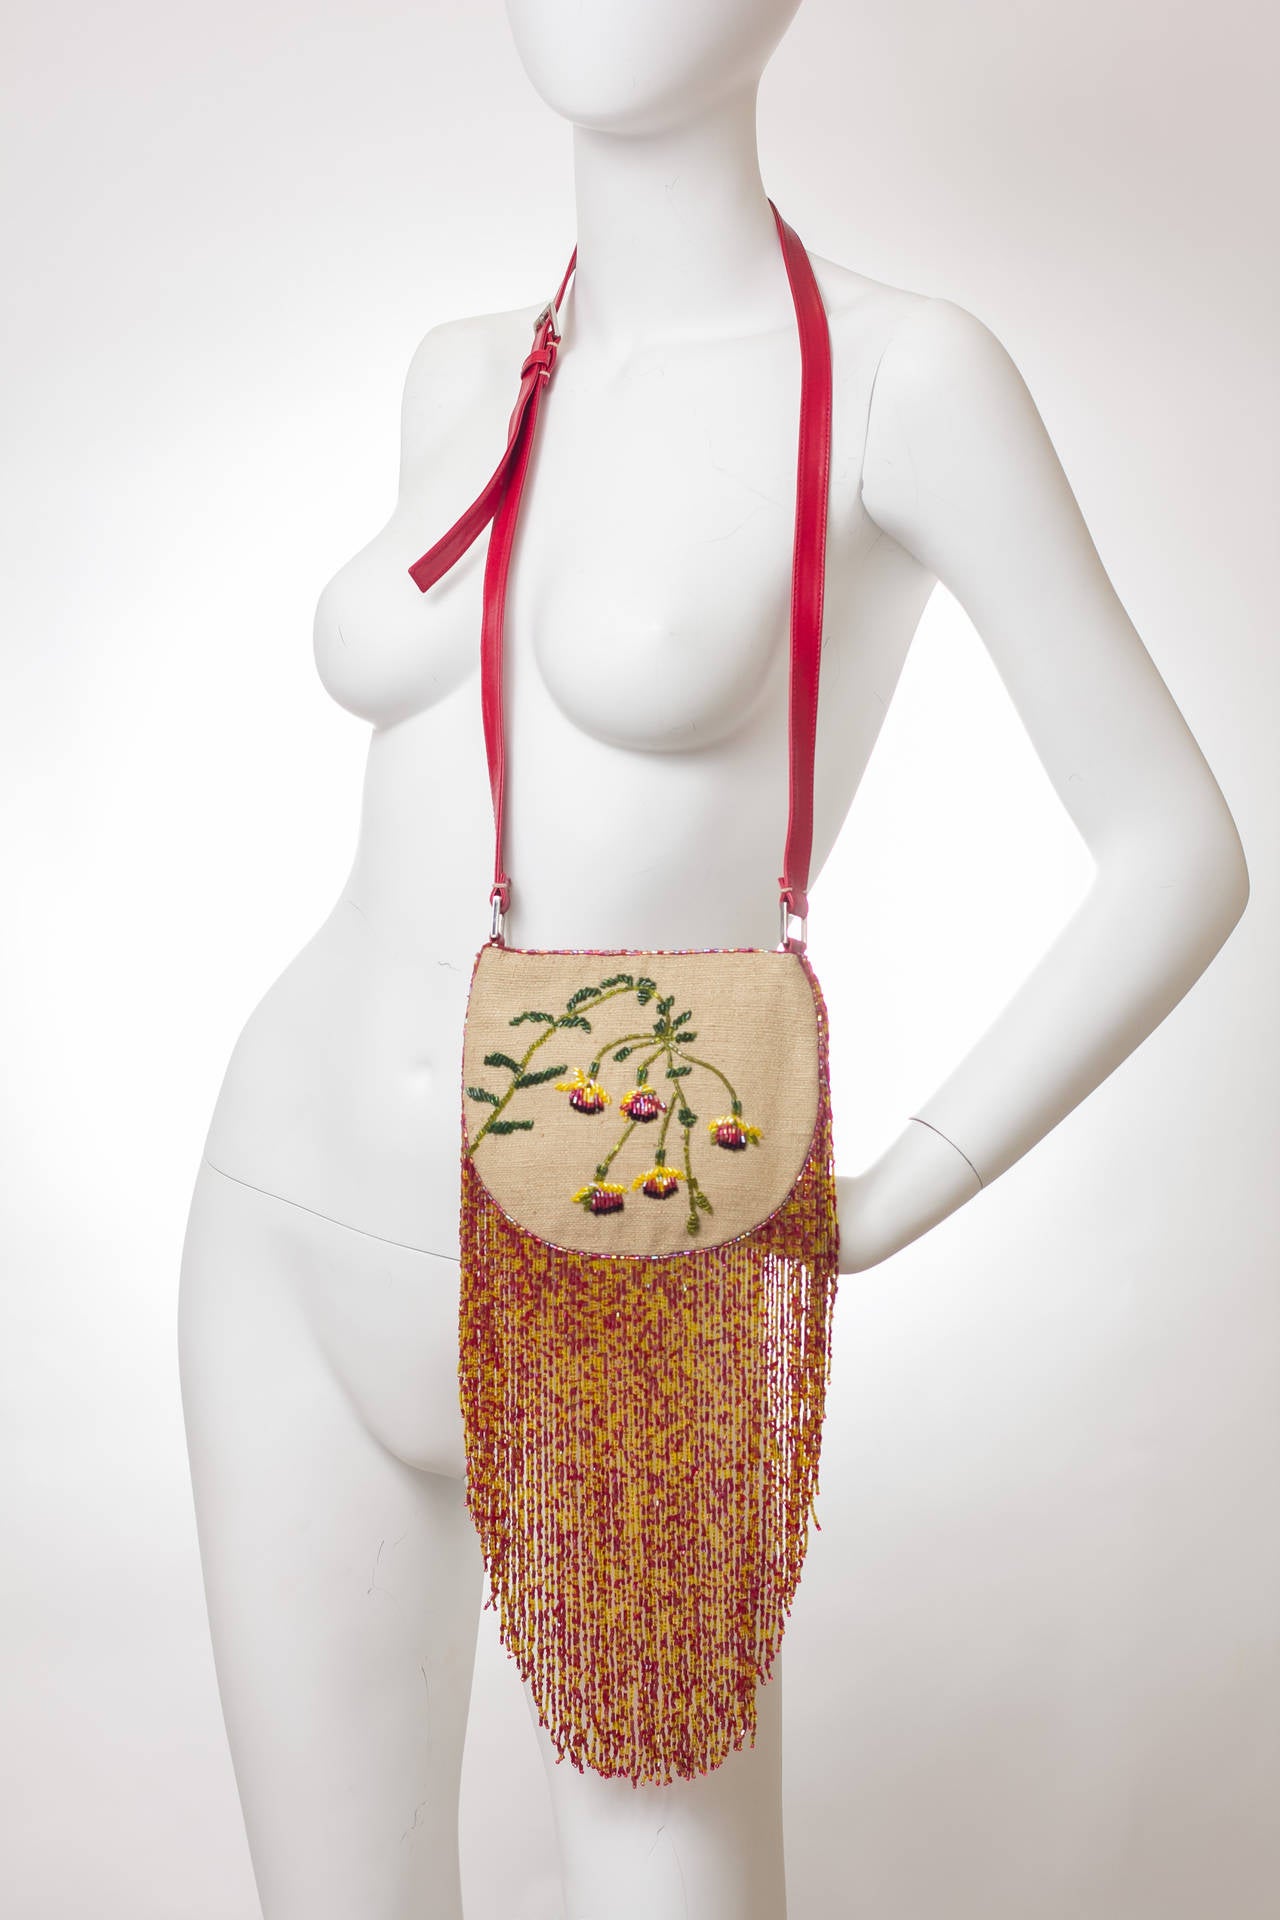 Valentino cross body or shoulder handbag with exquisite beaded and embroidered design and beaded fringe. Lined in silk. Magnetic closure. 

Measurements:
Pouch 6